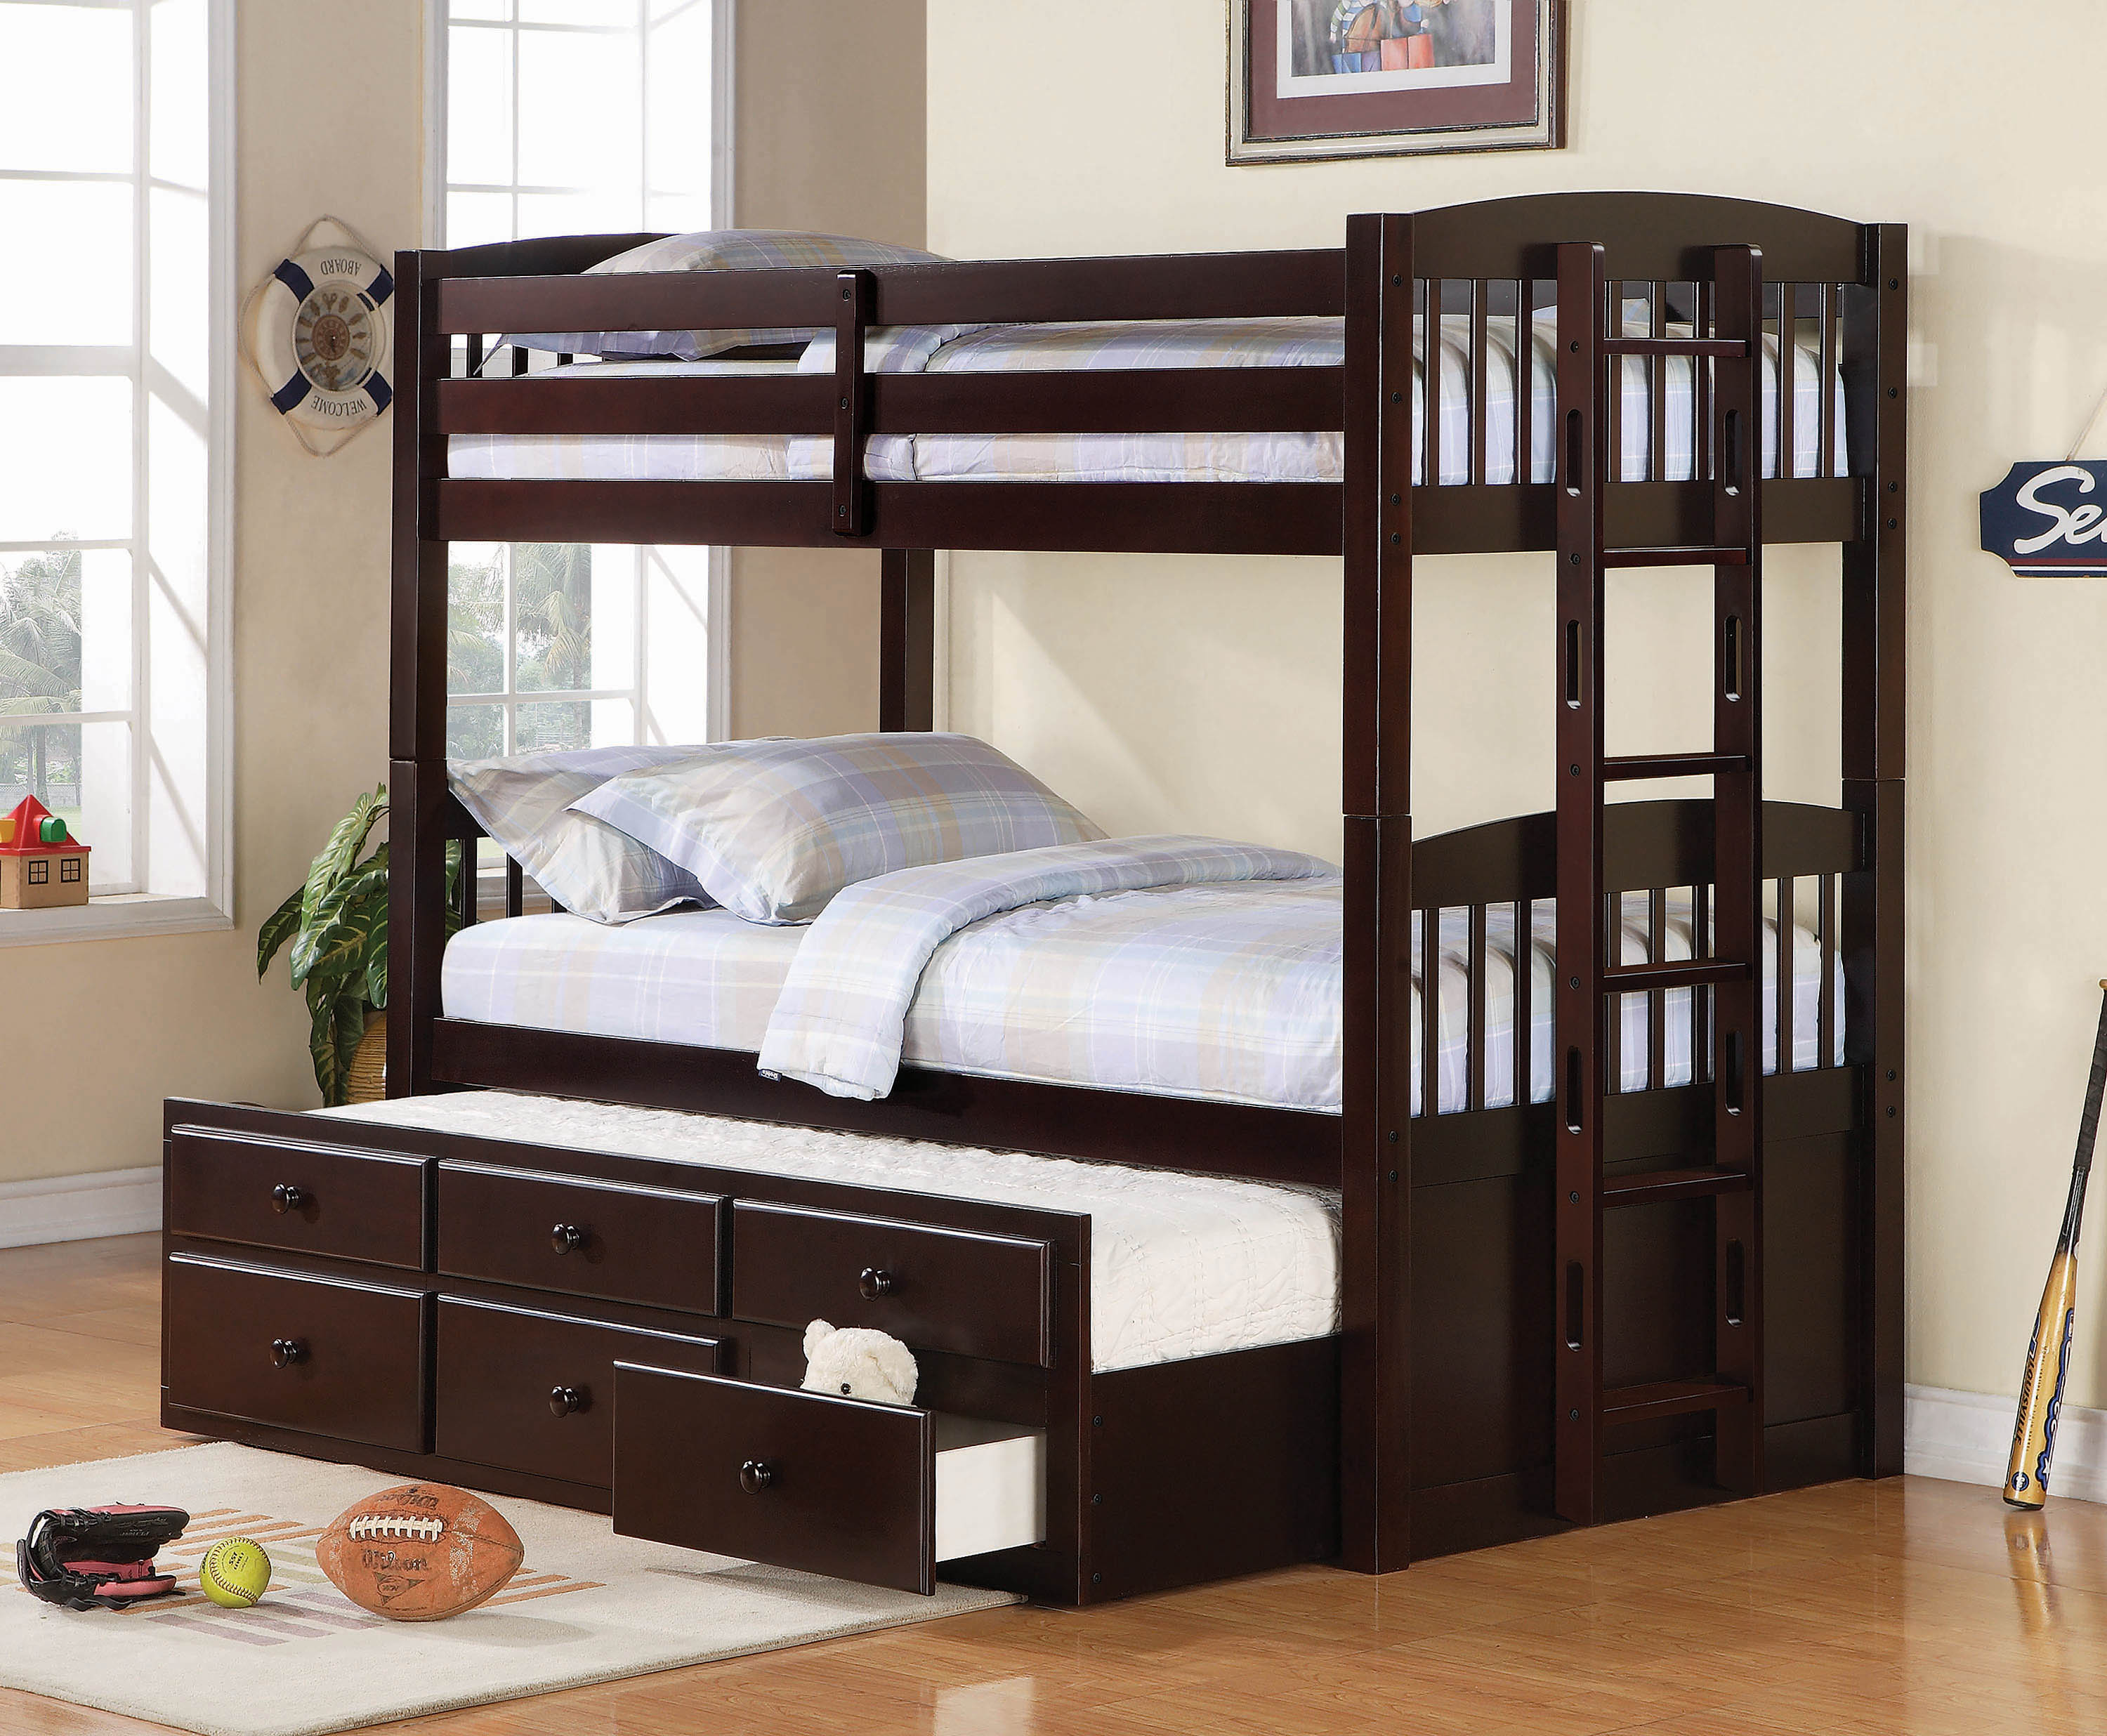 Image result for bunk beds with trundle